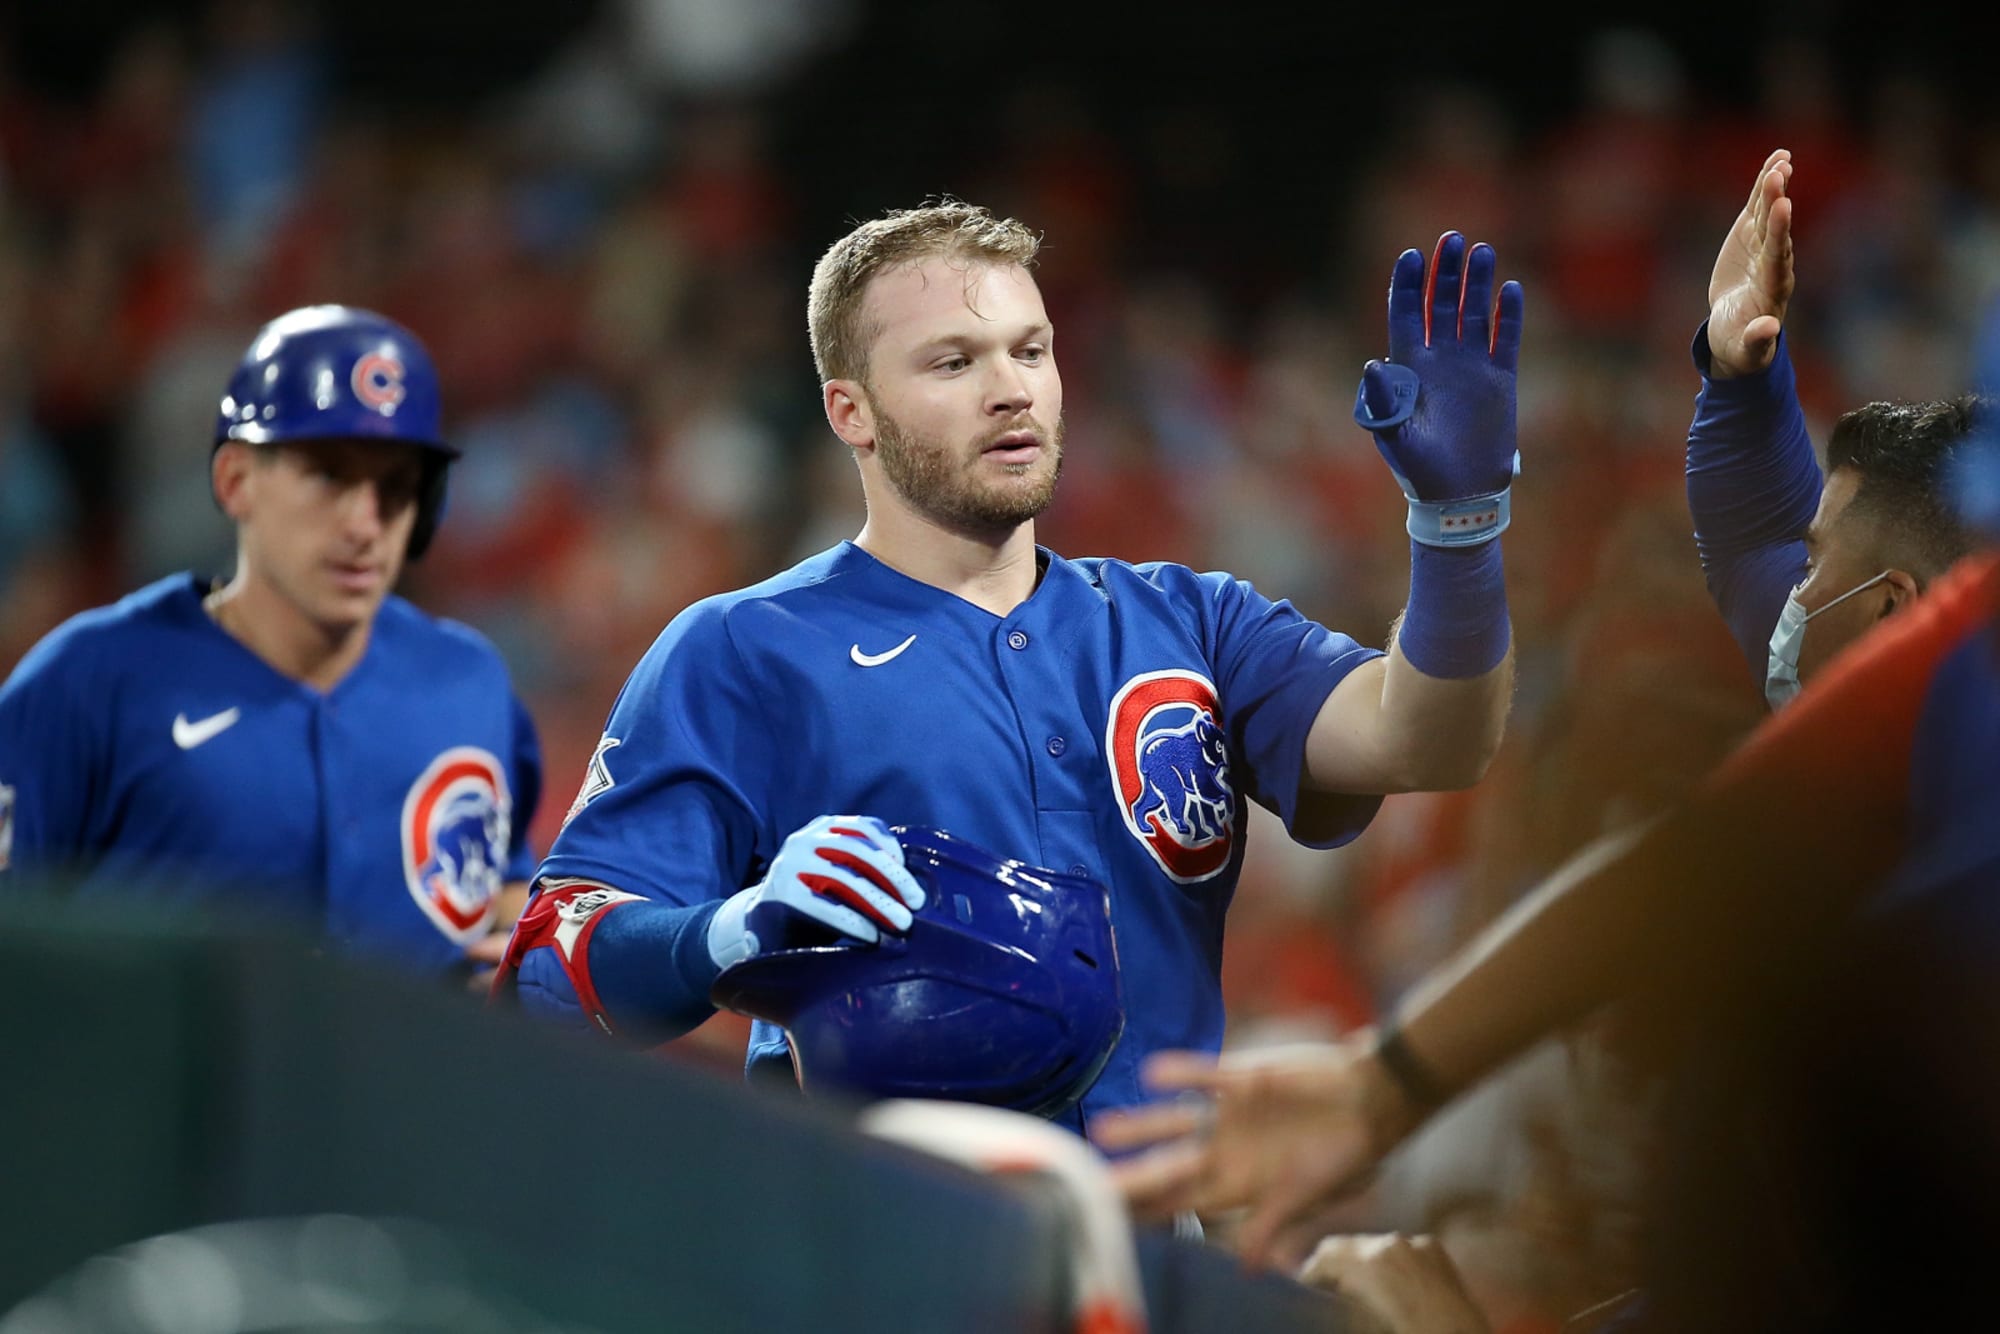 Cubs roster move: Frank Schwindel to injured list, Alfonso Rivas